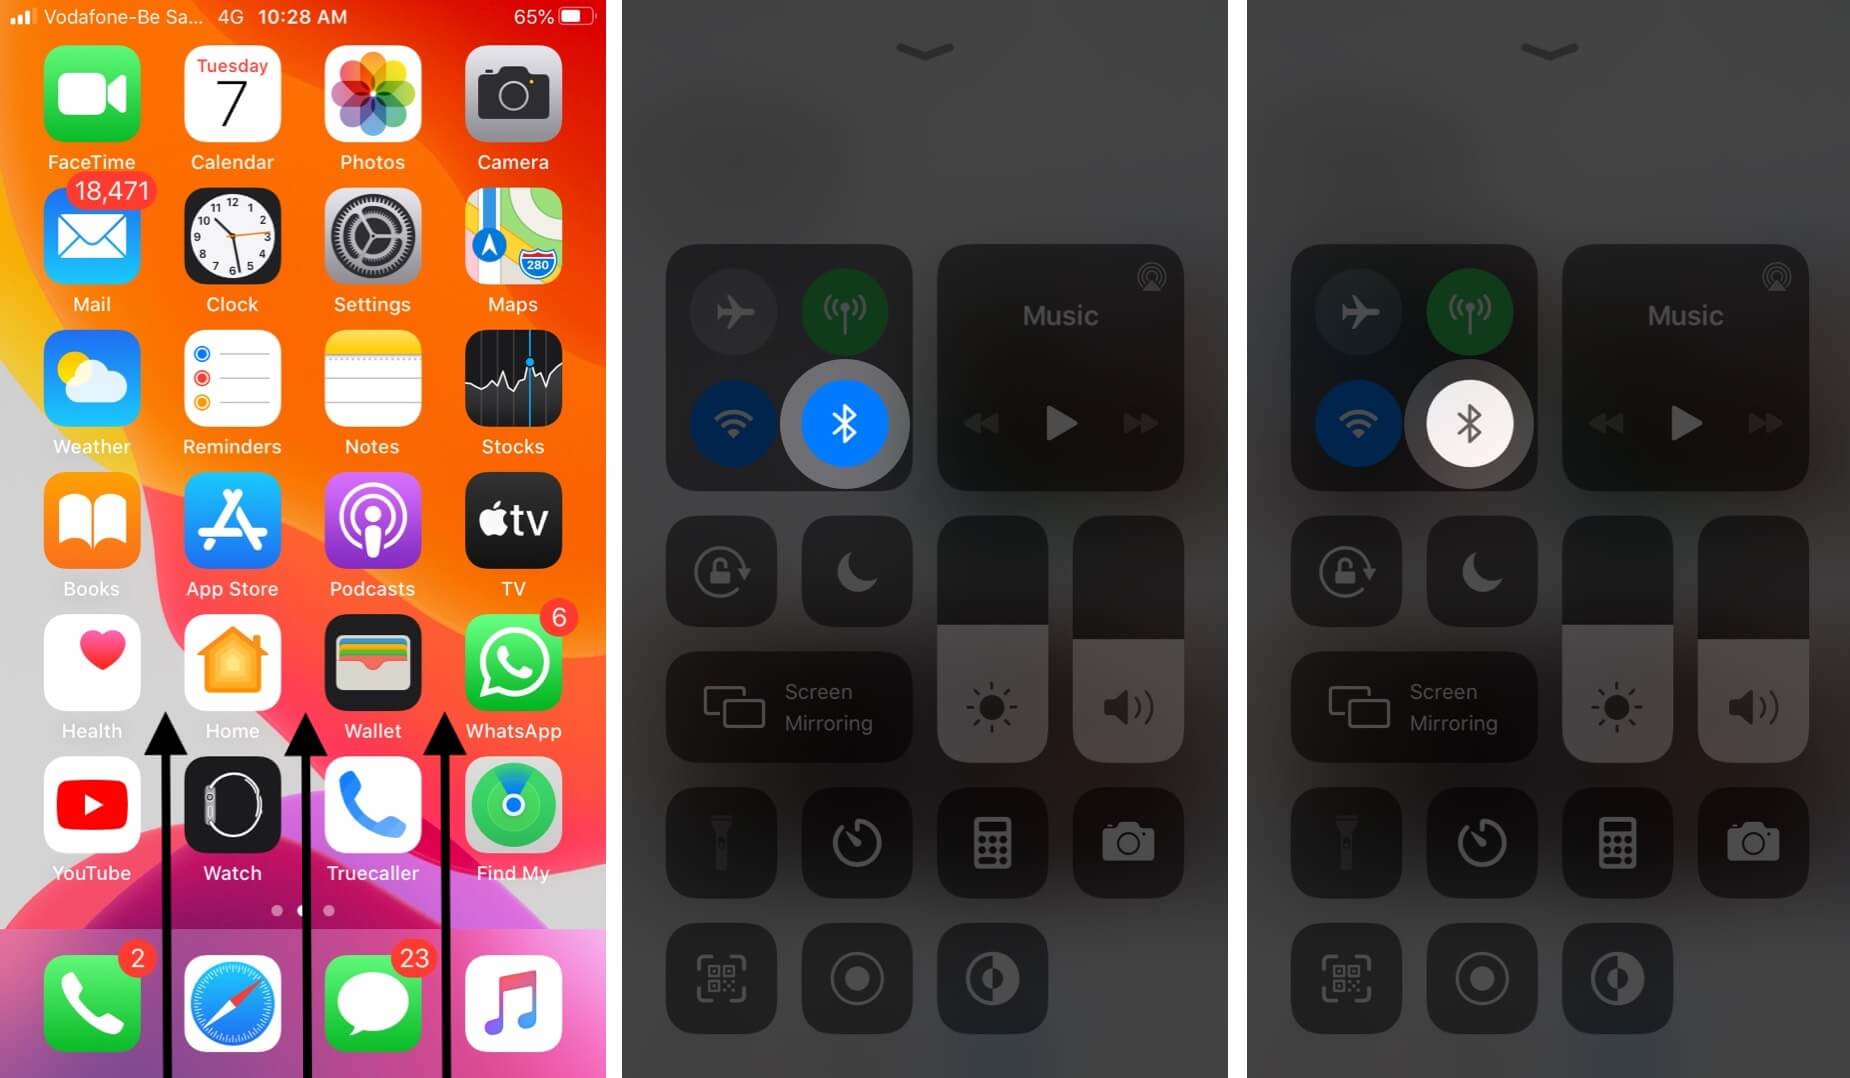 Turn Off Bluetooth from Control Center on iPhone